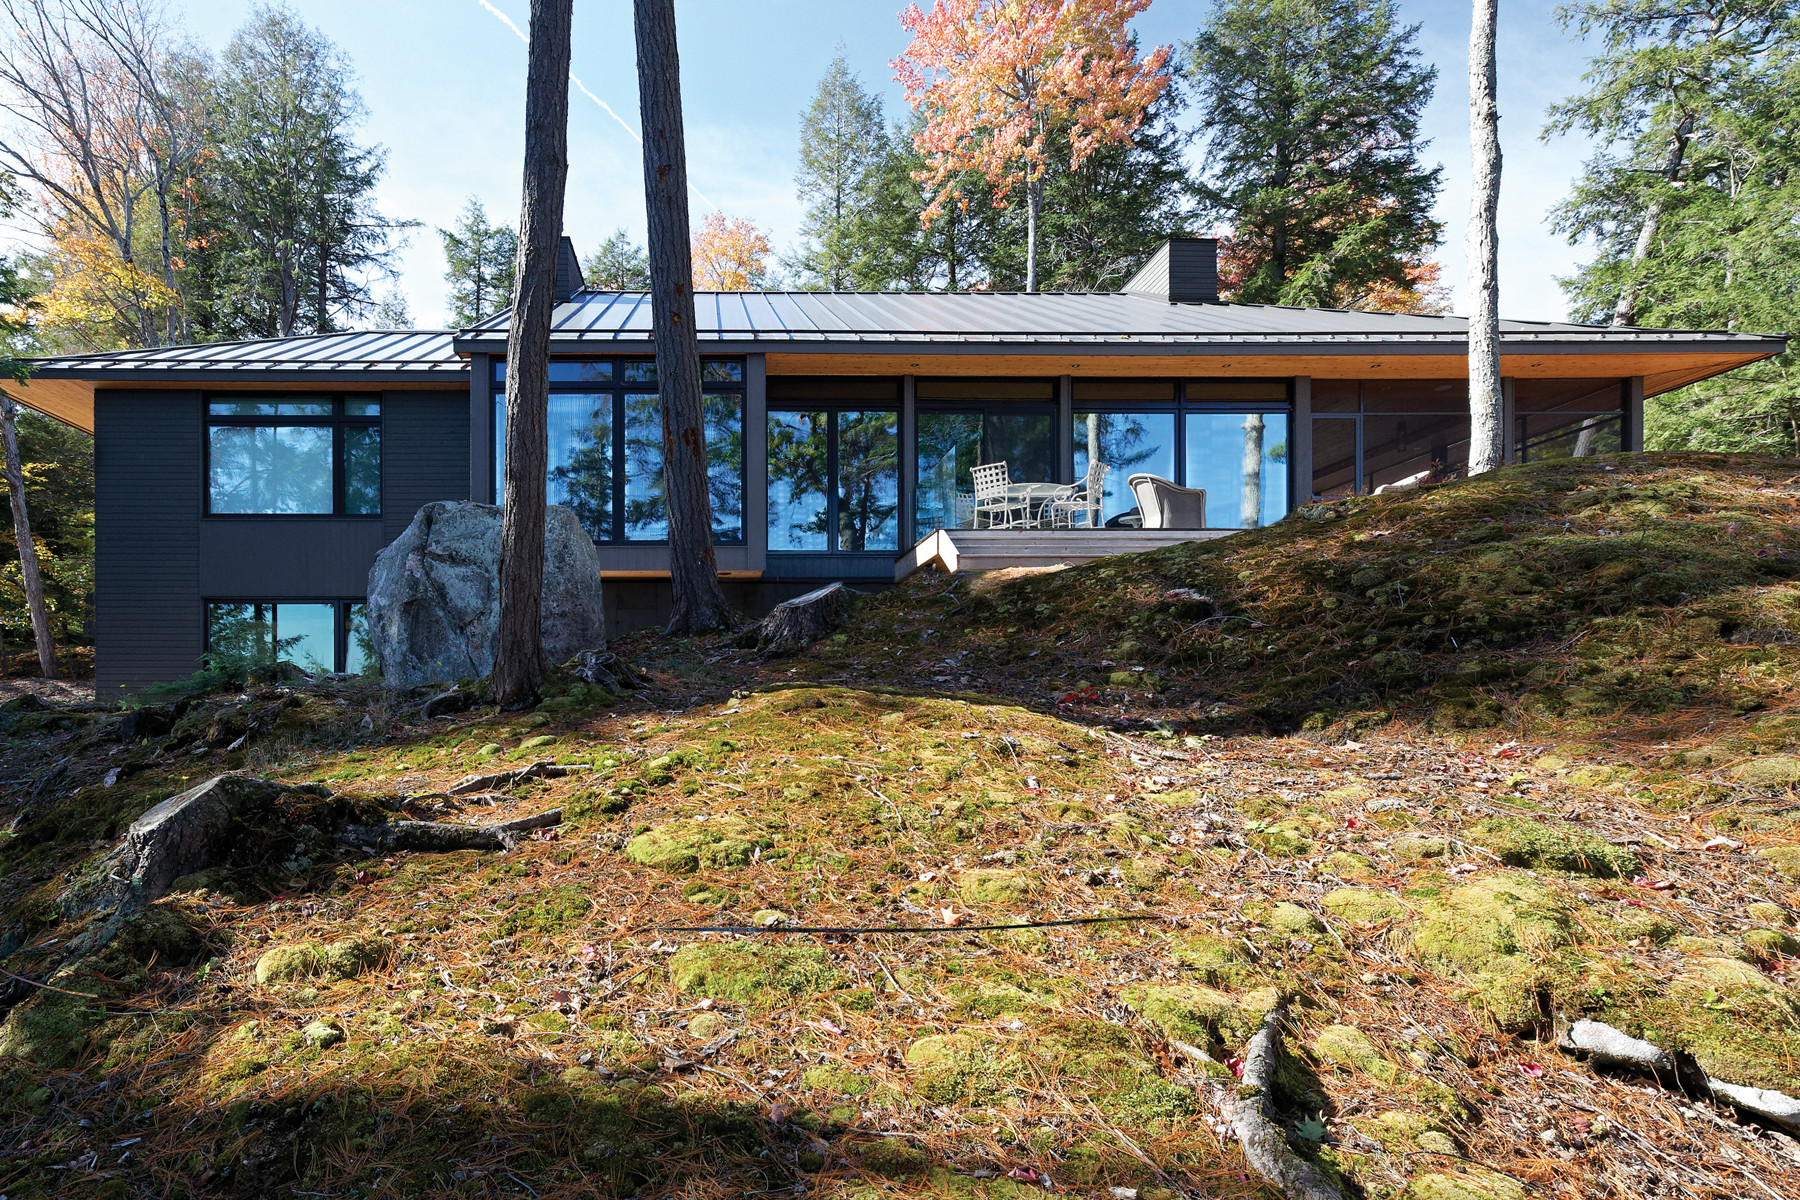 Elevation of cottage with trees reflected in windows and rugged landscape in foreground